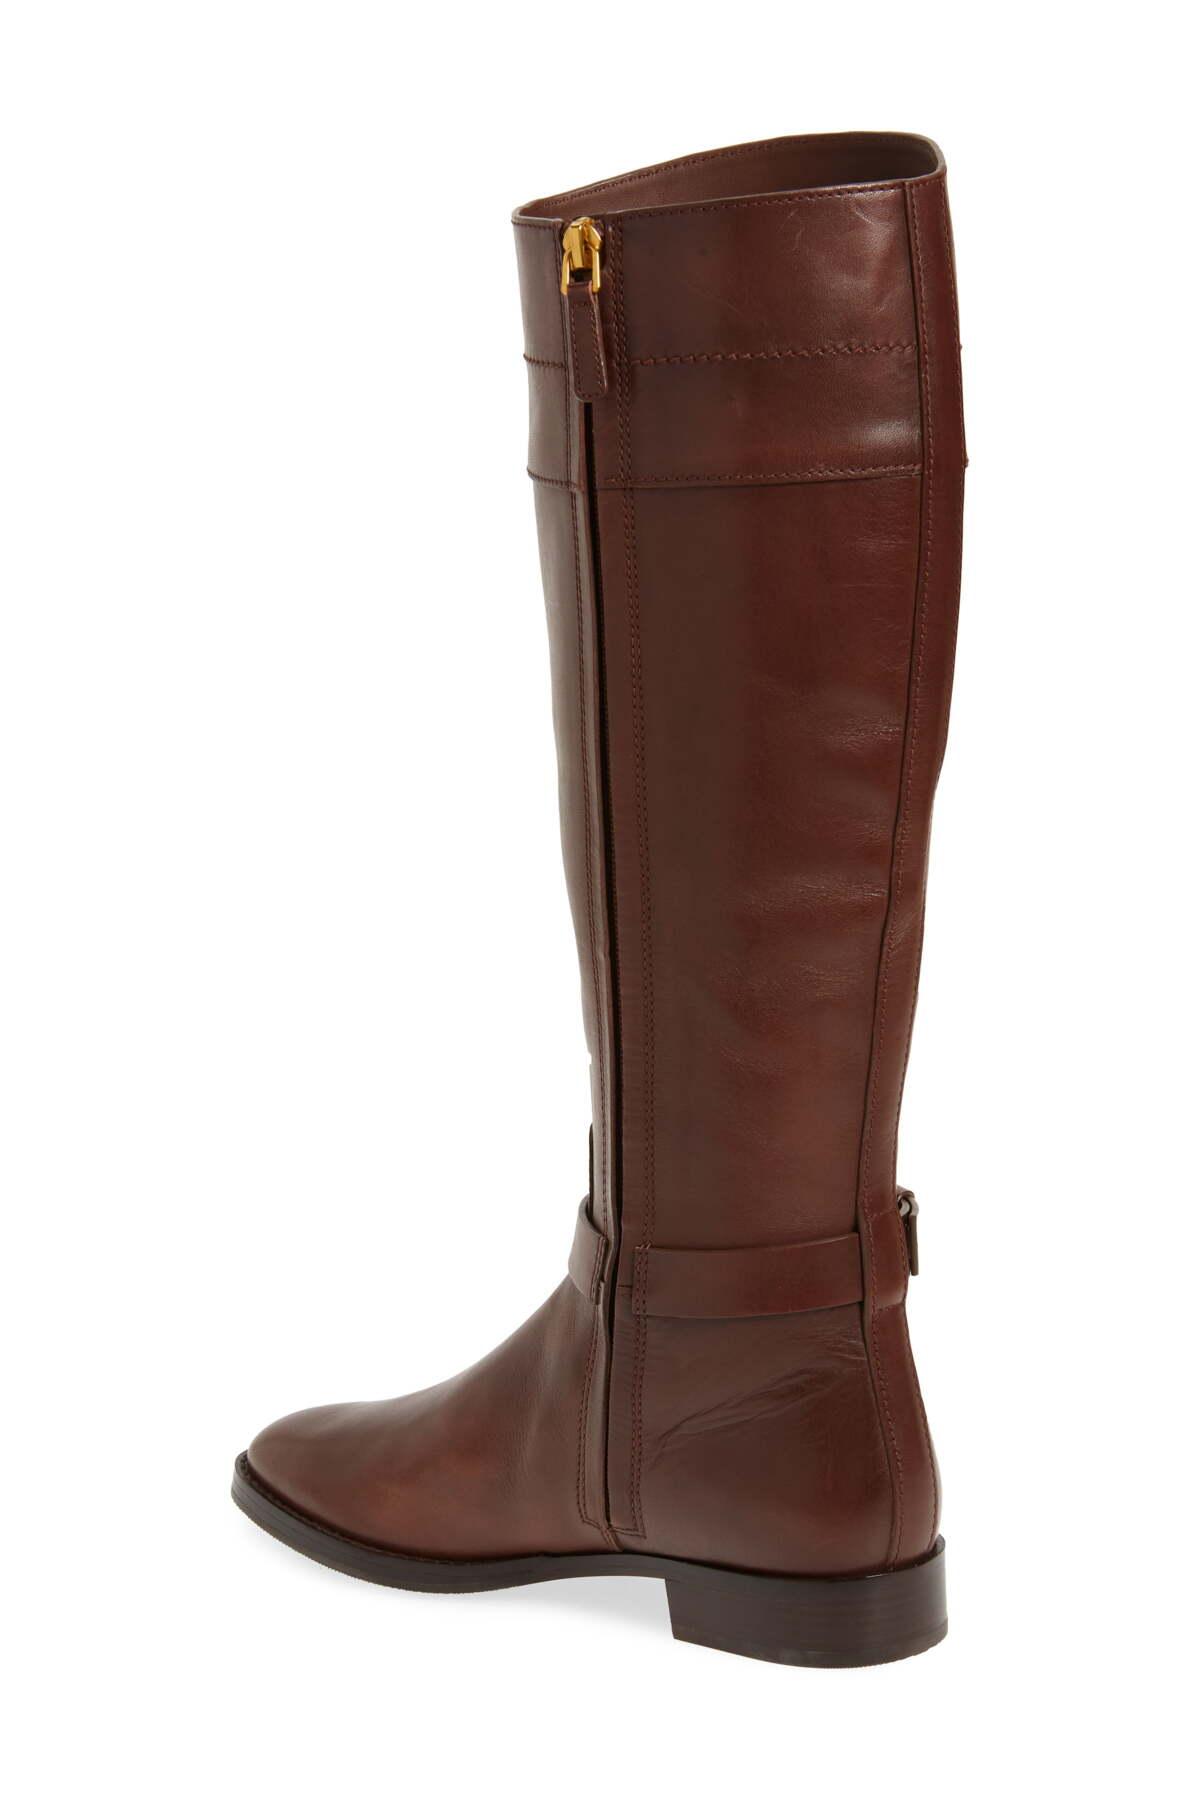 Tory Burch Leather Everly Knee High Boot in Brown - Lyst